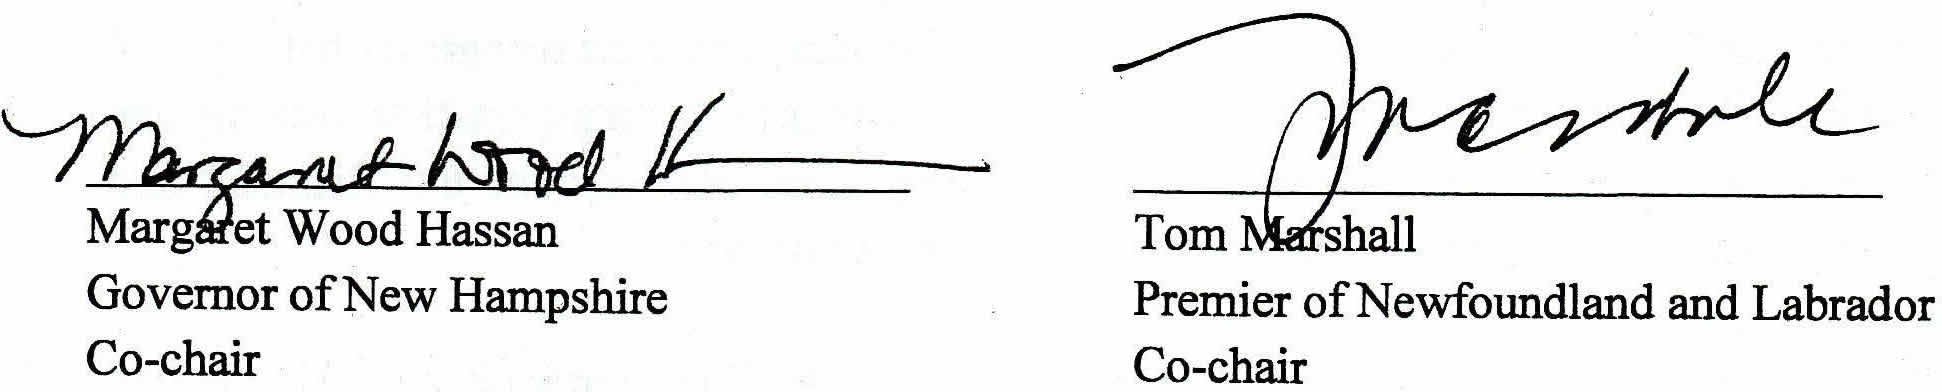 Signatures of Margaret Wood Hassan, Governor of New Hampshire, Co-chair and Tom Marshall, Premier of Newfoundland and Labrador, Co-chair